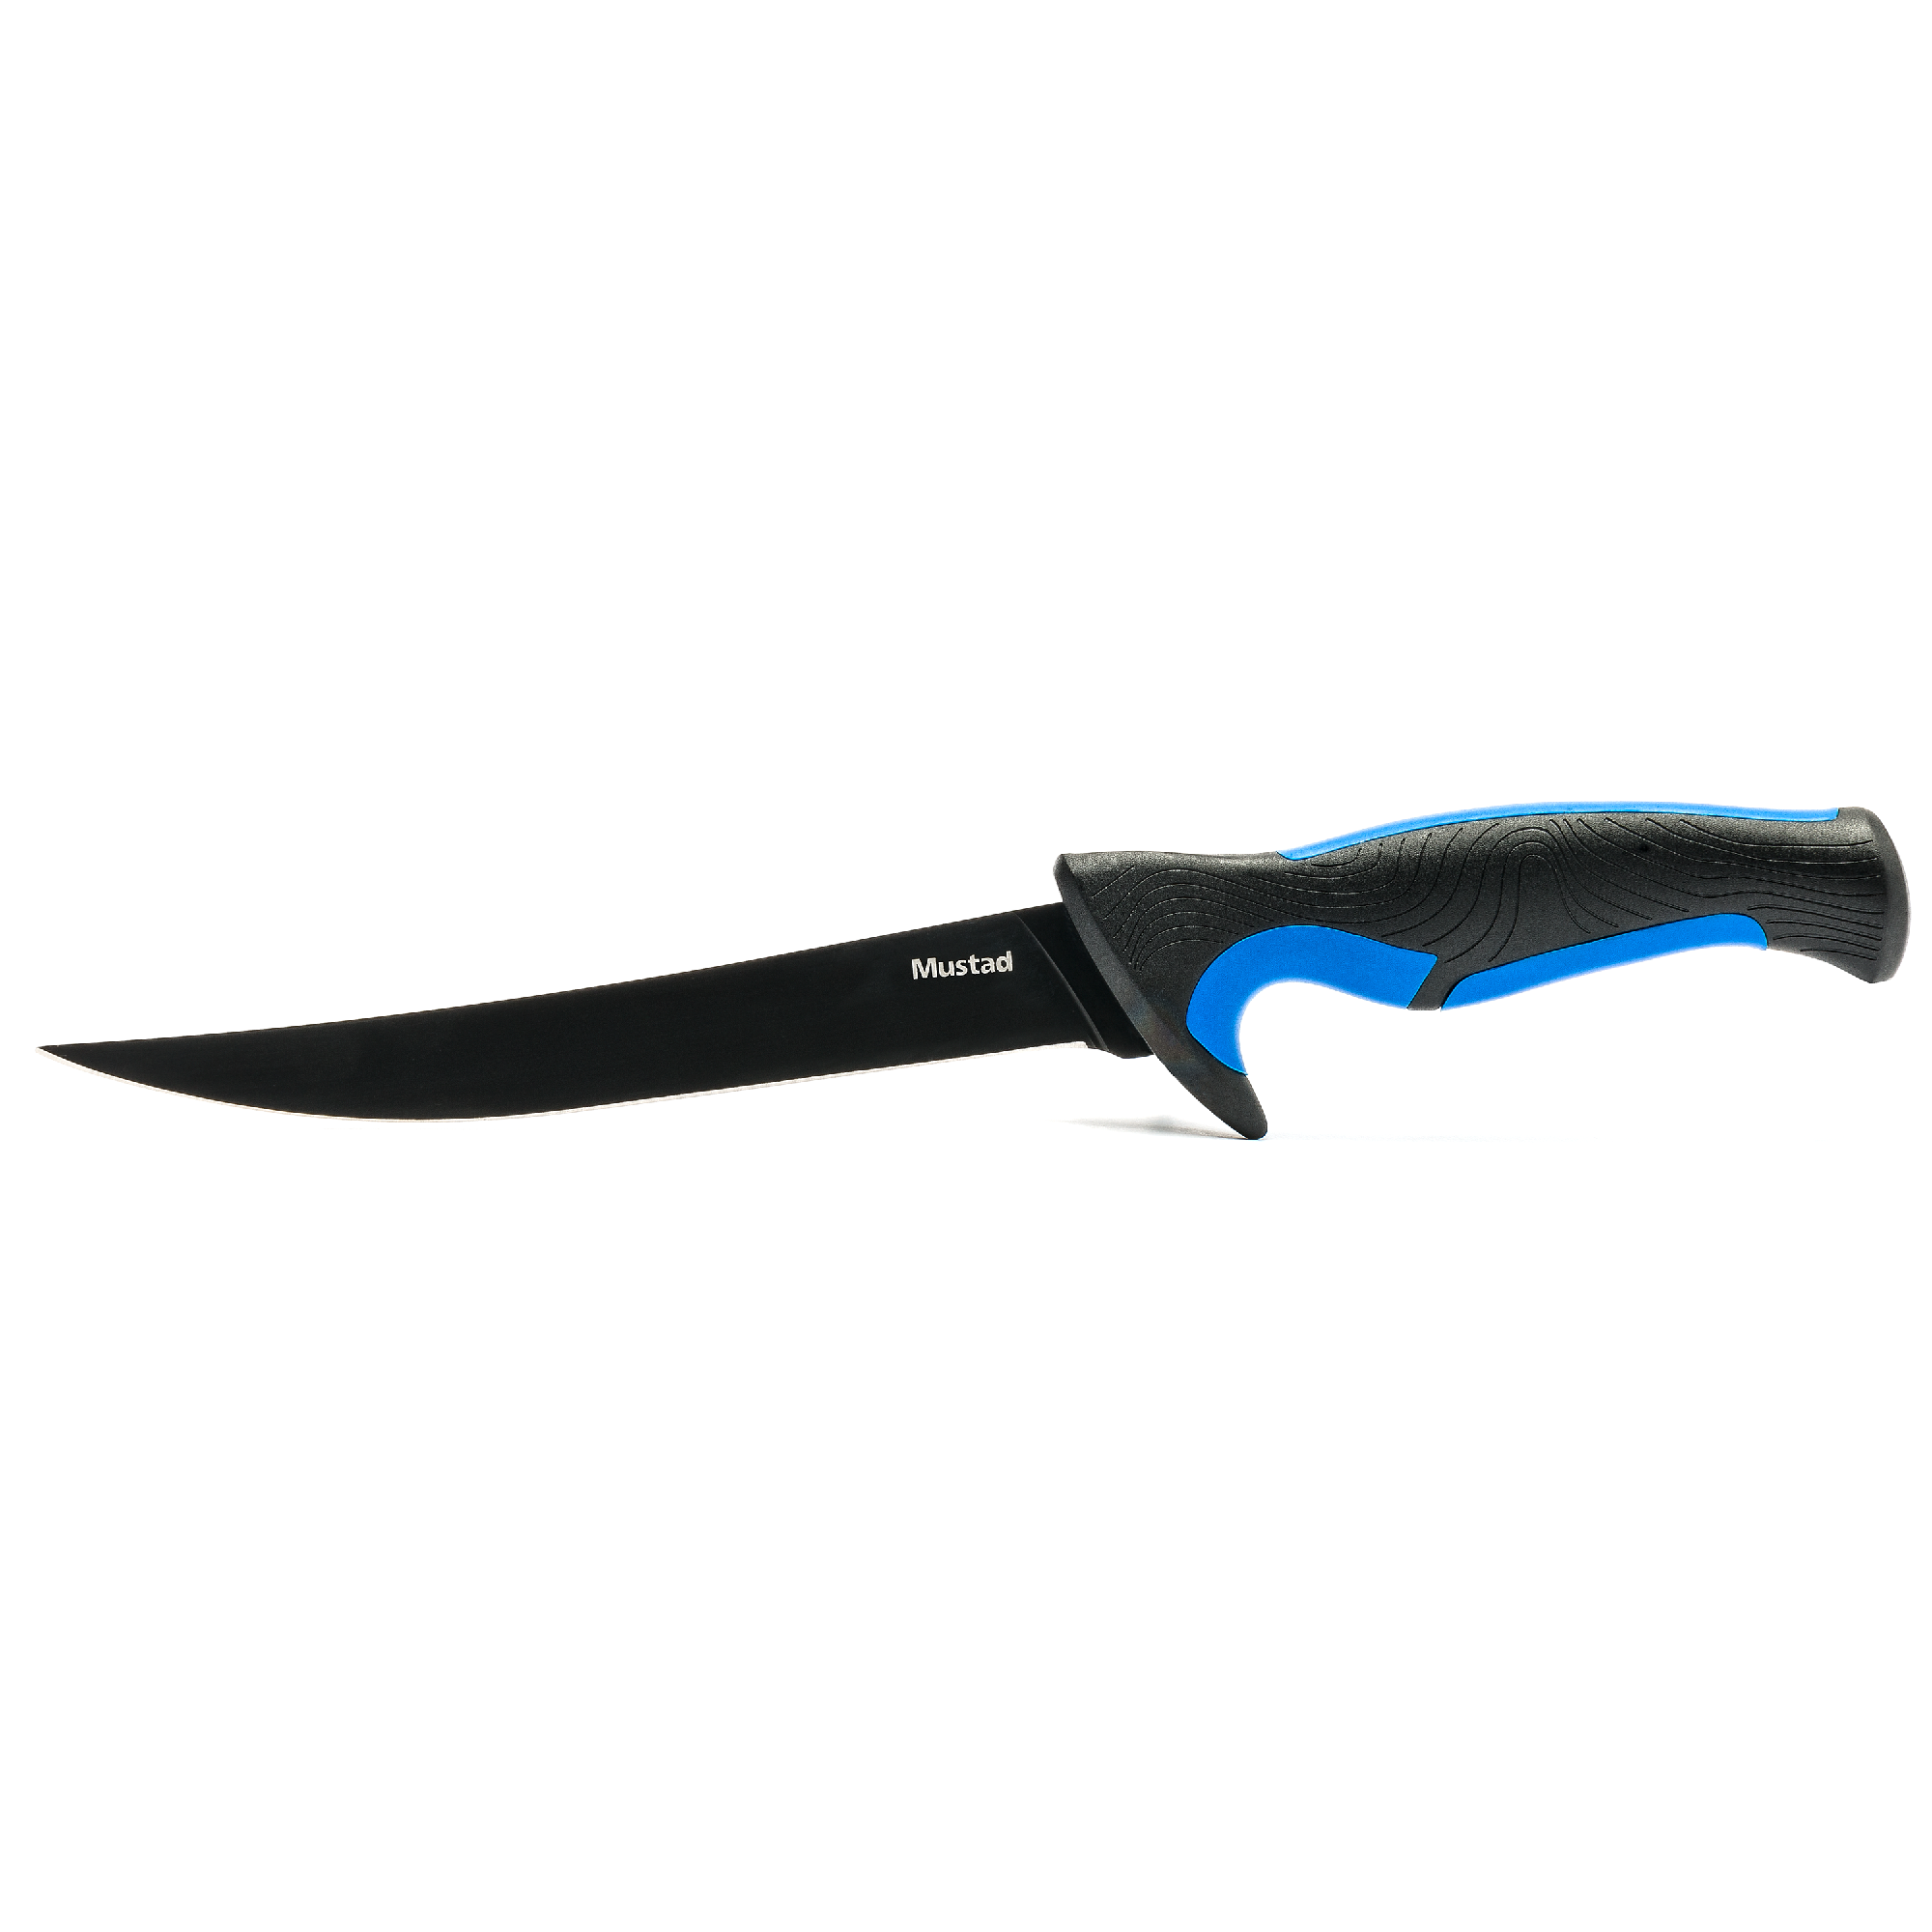 Realtree Stainless Steel Fishing Fillet Knife, 6 Blade Length, Black and  Blue 